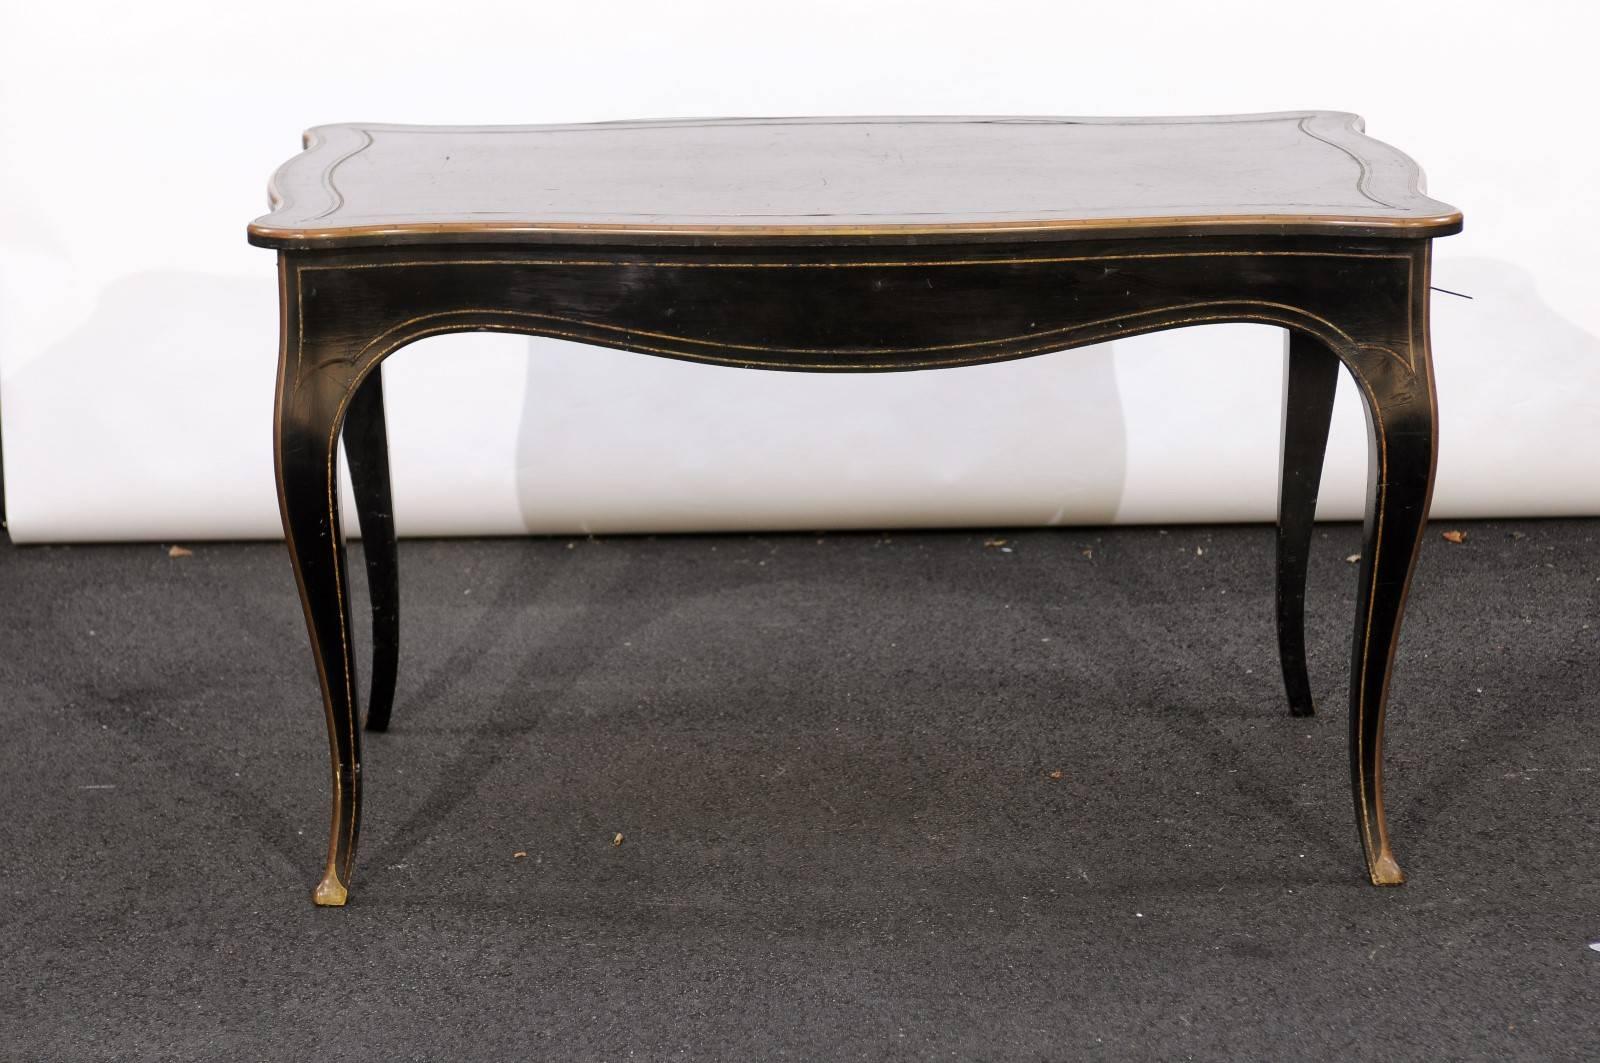 French Napoleon III Style Writing Table with Gilded Accents and Cabriole Legs In Good Condition For Sale In Atlanta, GA